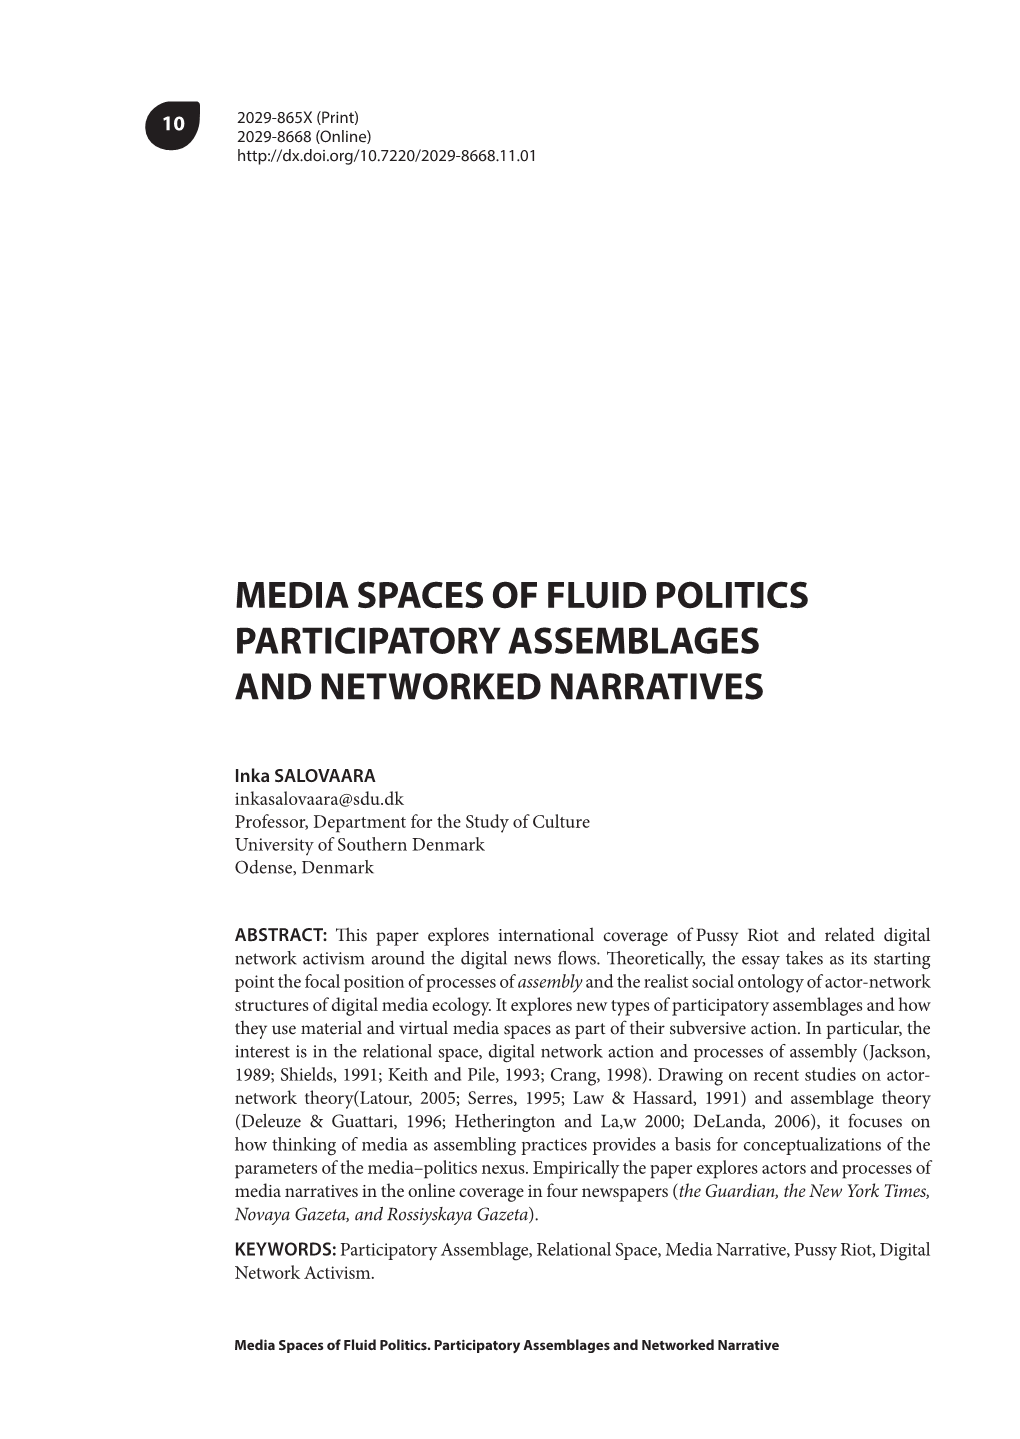 Media Spaces of Fluid Politics Participatory Assemblages and Networked Narratives